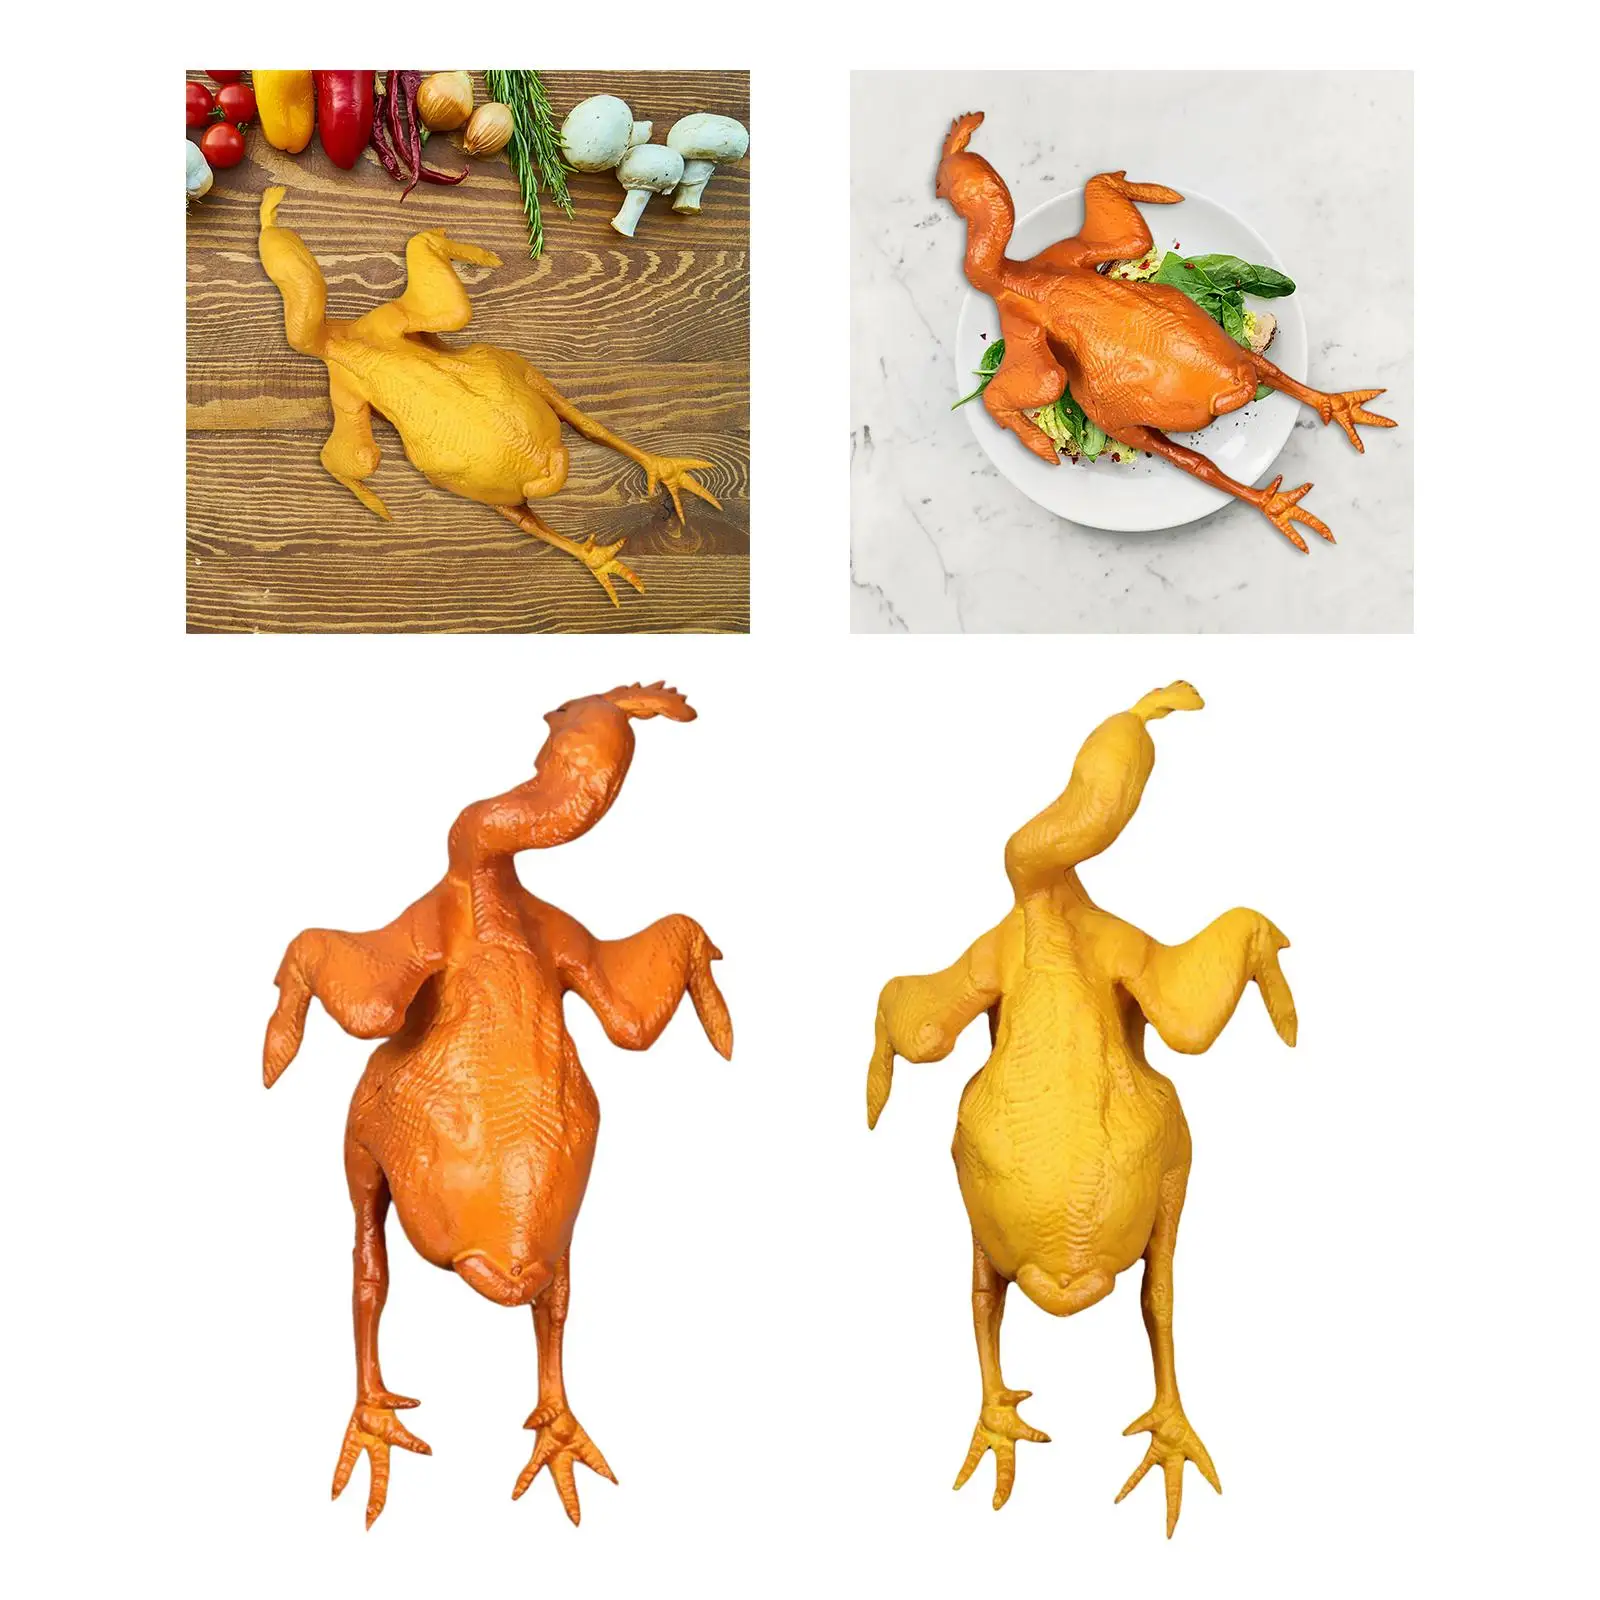 Roast Chicken Model Turkey Ornament for Home Kitchen Dining Table Decor